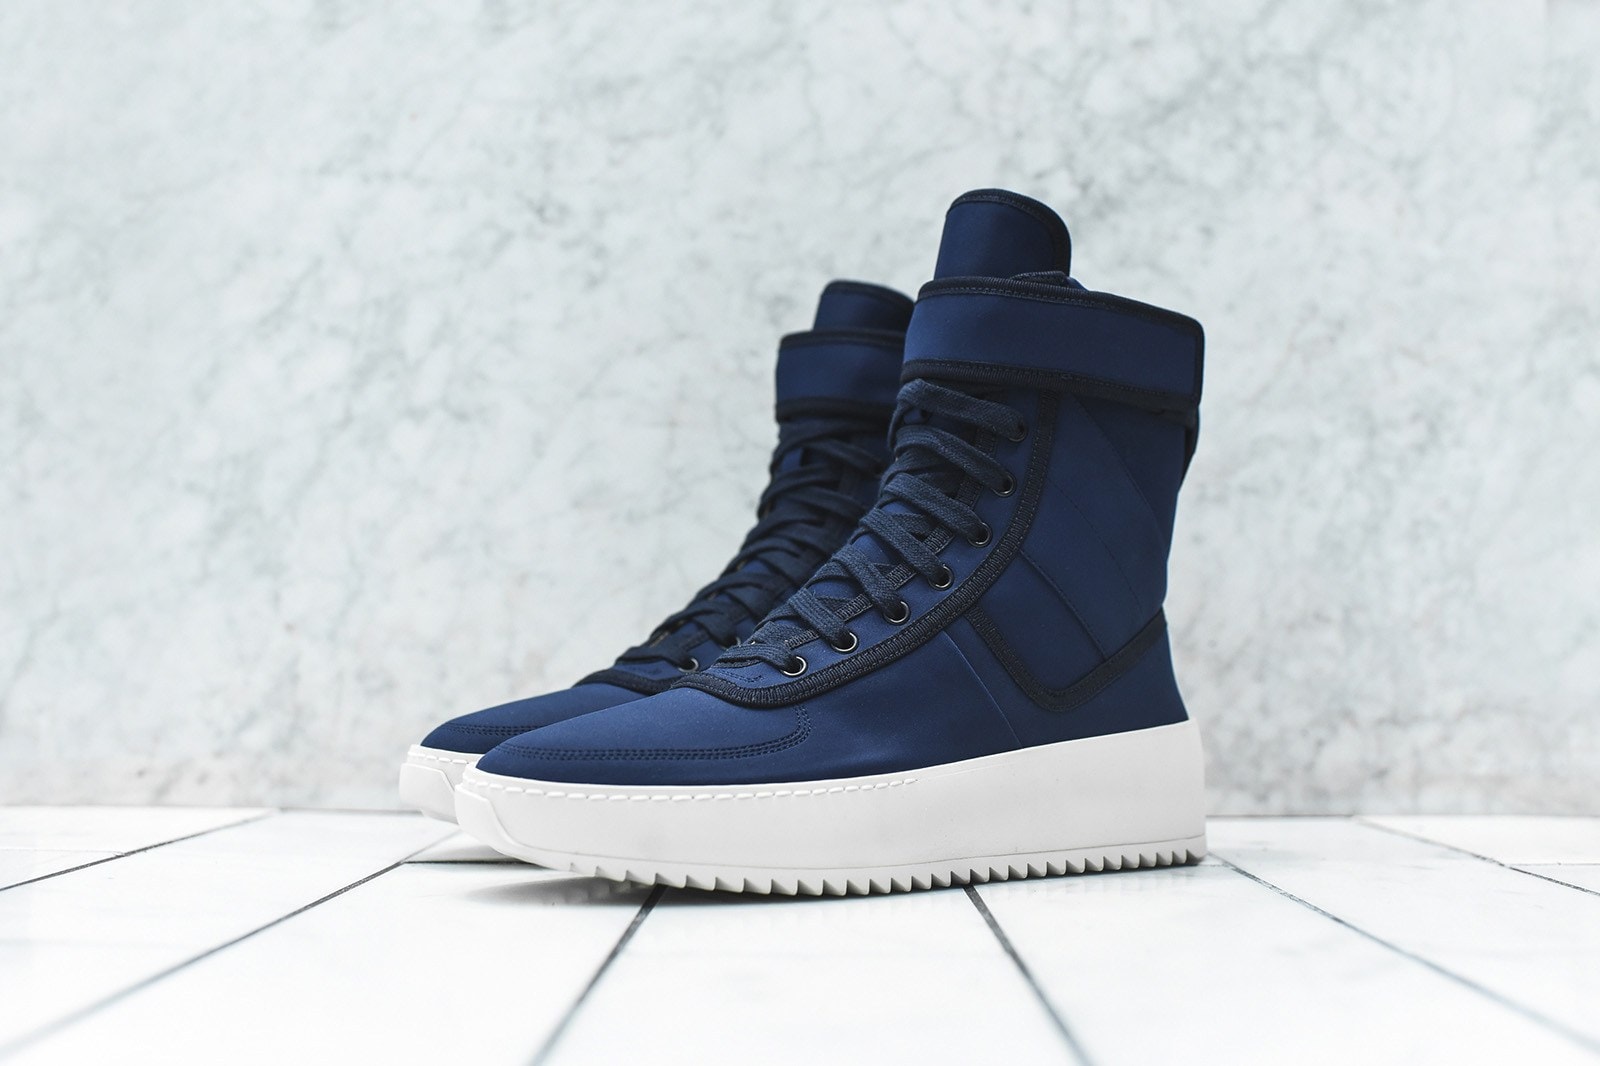 KITH x Fear of God Limited Military Sneaker